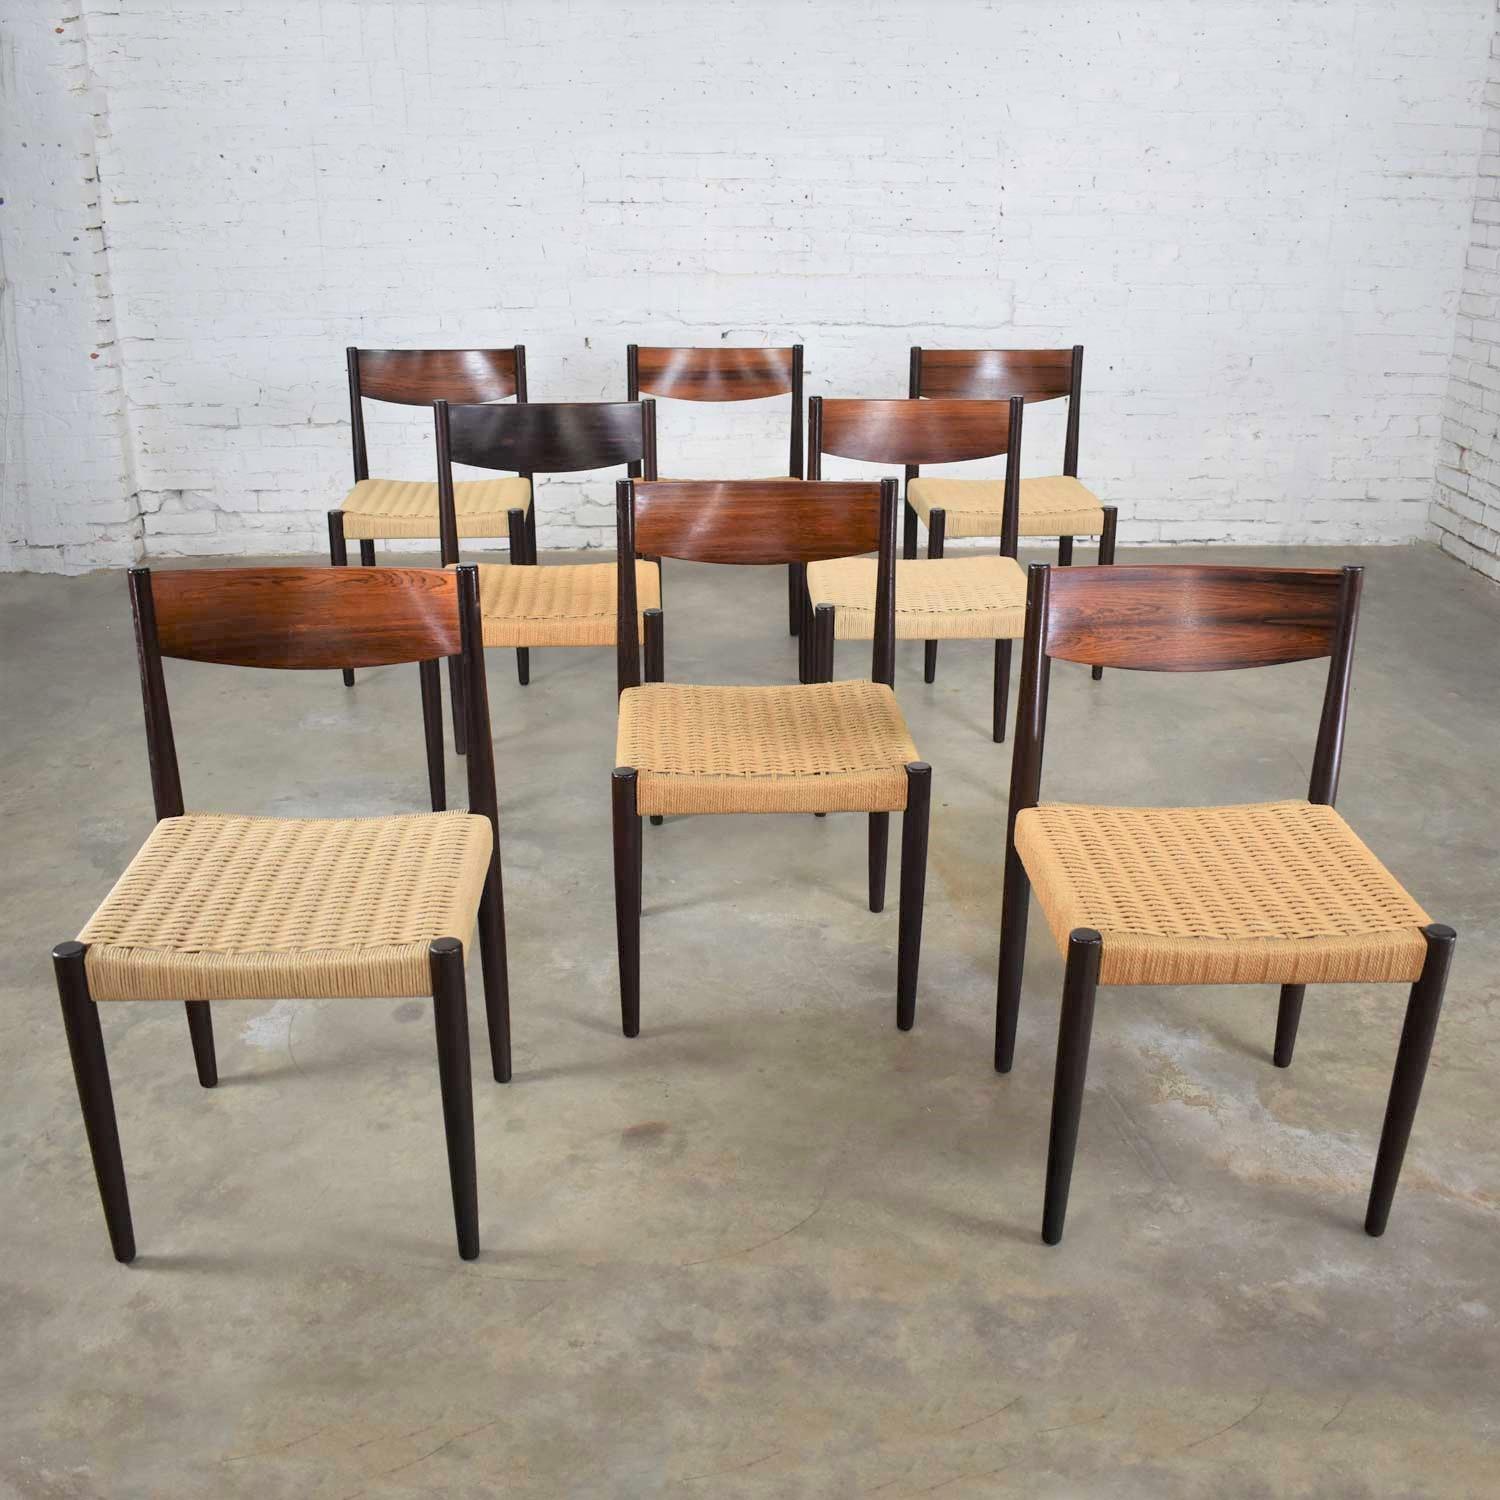 20th Century Poul Volther Scandinavian Modern Rosewood Paper Cord Dining Chairs by Frem Røjle